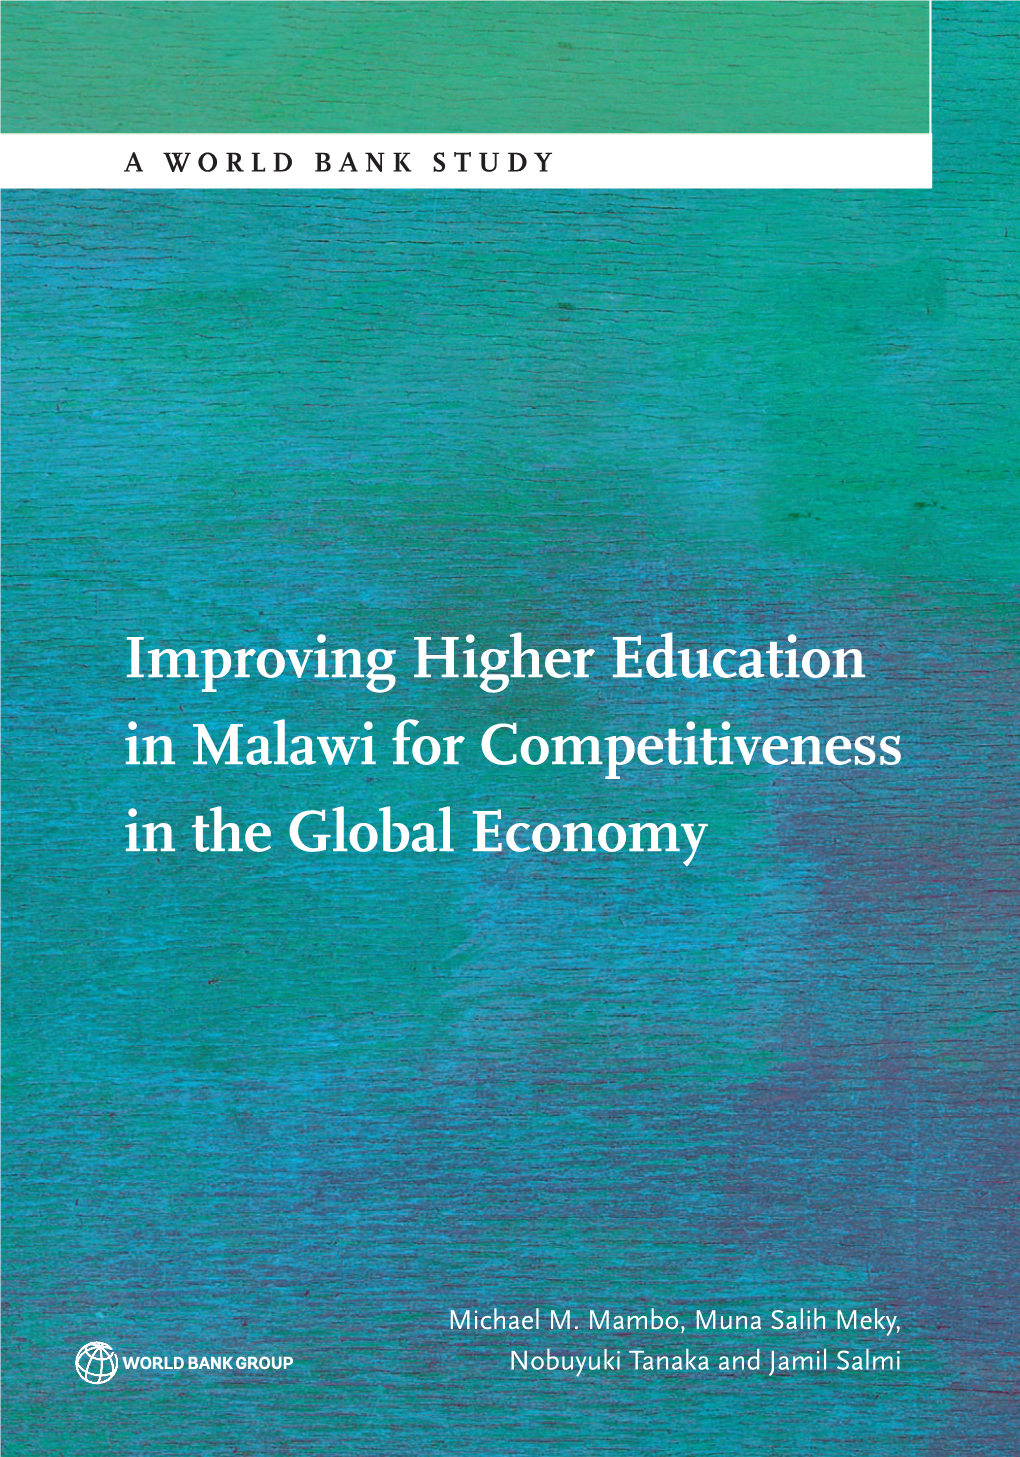 Improving Higher Education in Malawi for Competitiveness in the Global